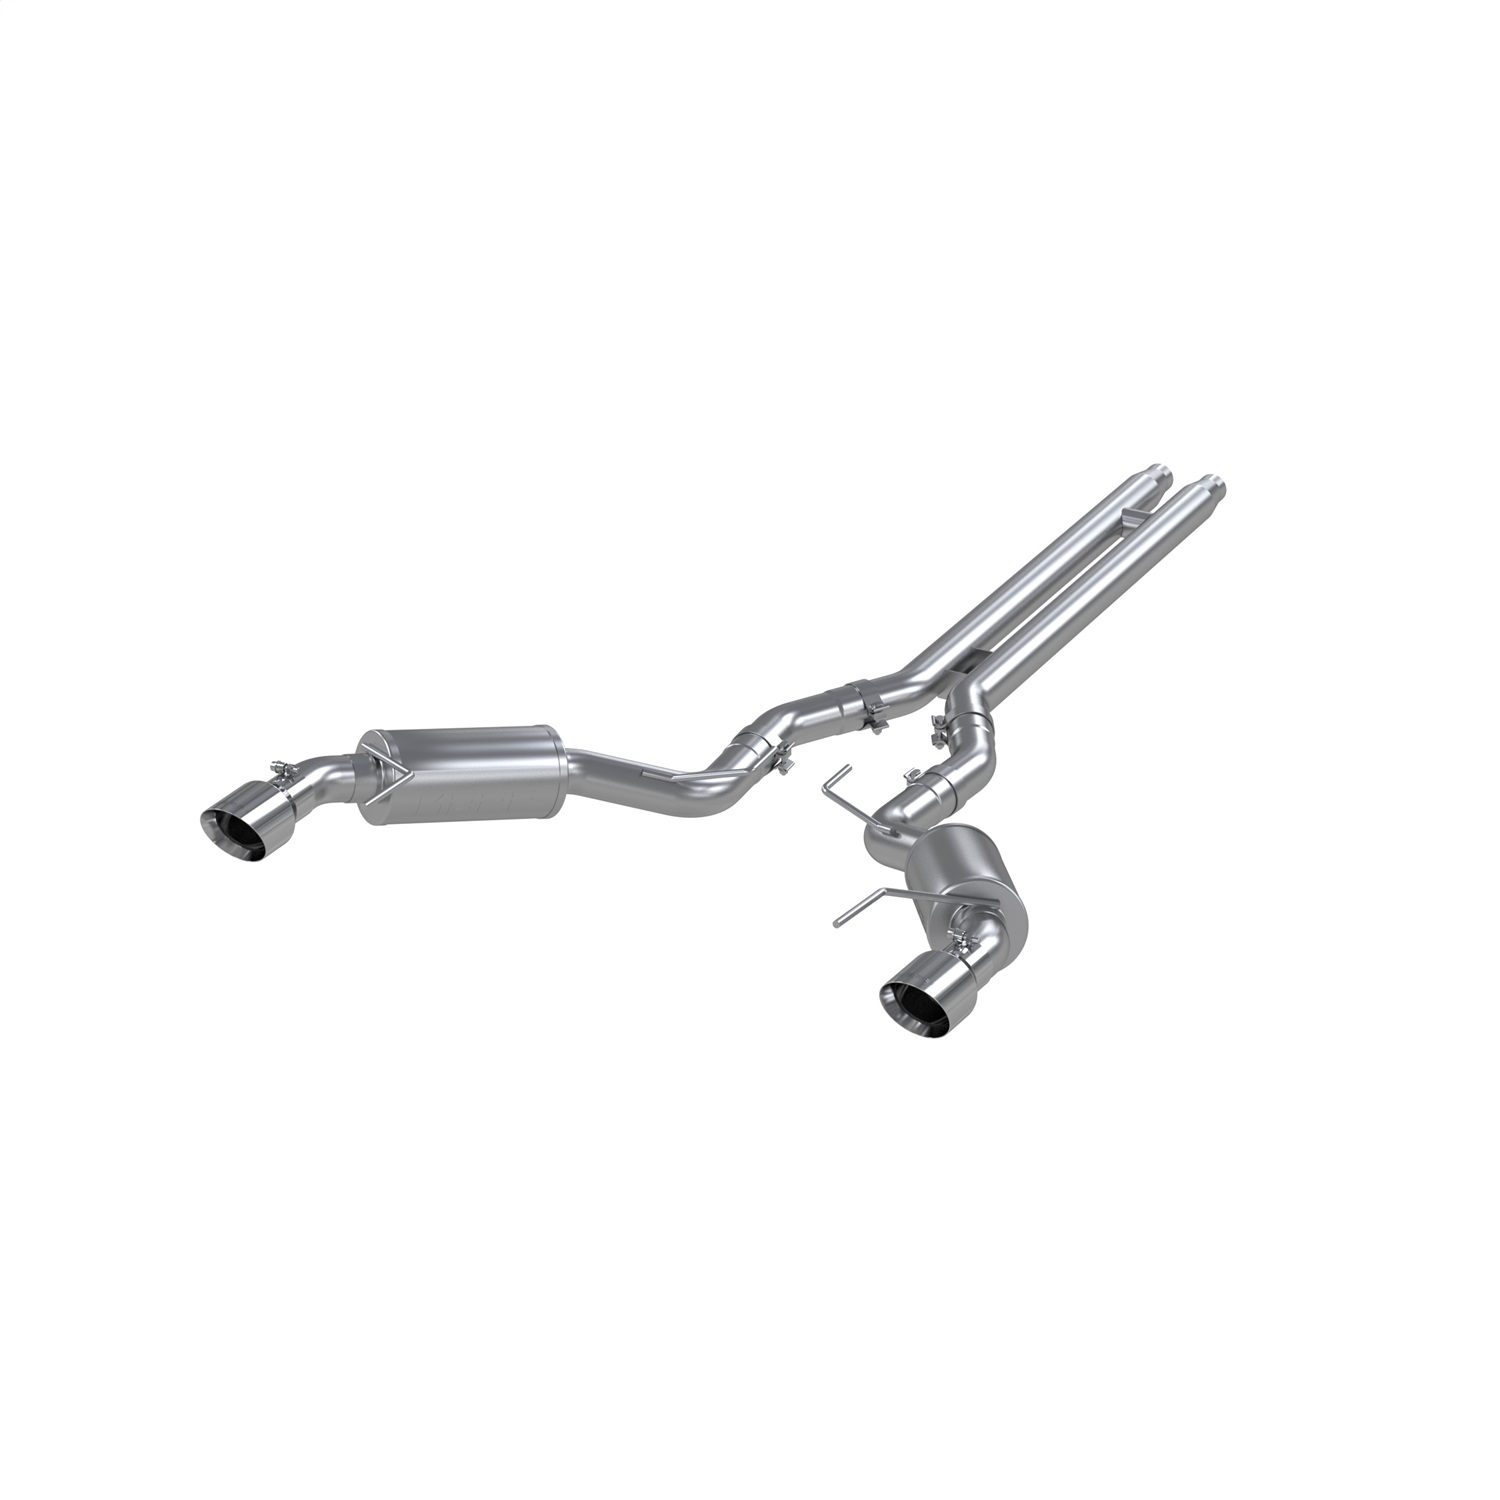 MBRP Exhaust S7277409 Armor Plus Cat Back Exhaust System Fits 15-17 Mustang